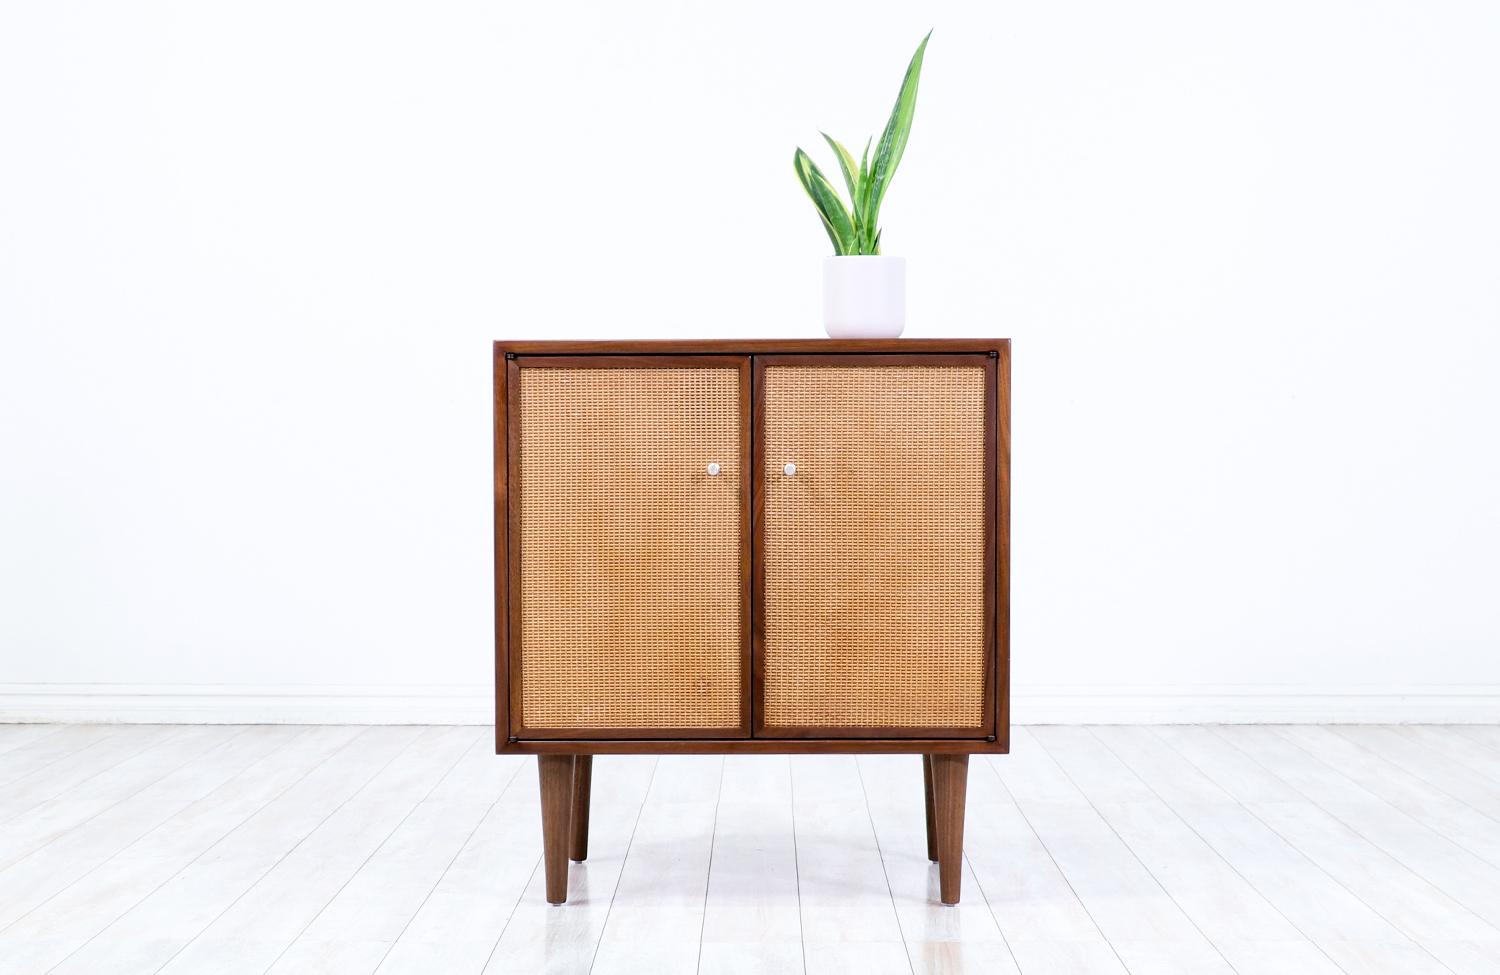  Expertly Restored - Mid-Century Modern Walnut Cabinet with Cane Doors In Excellent Condition For Sale In Los Angeles, CA